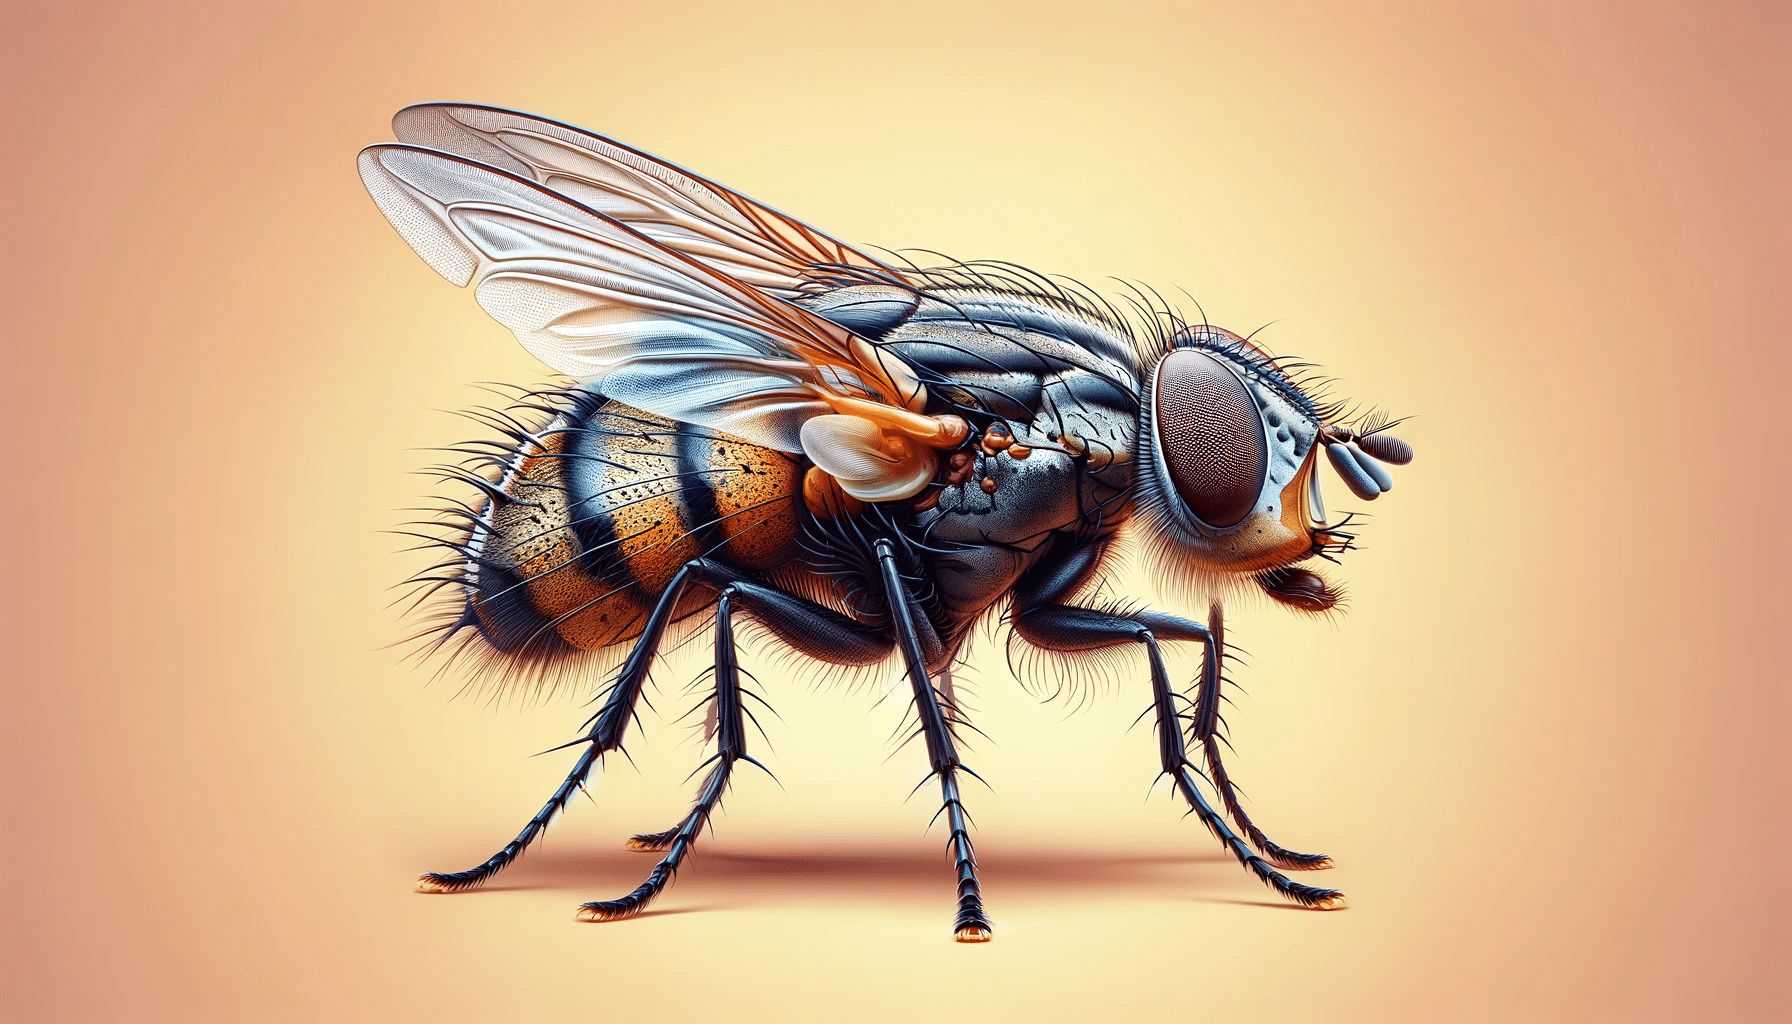 Close-up view of a realistic fly on a bright background